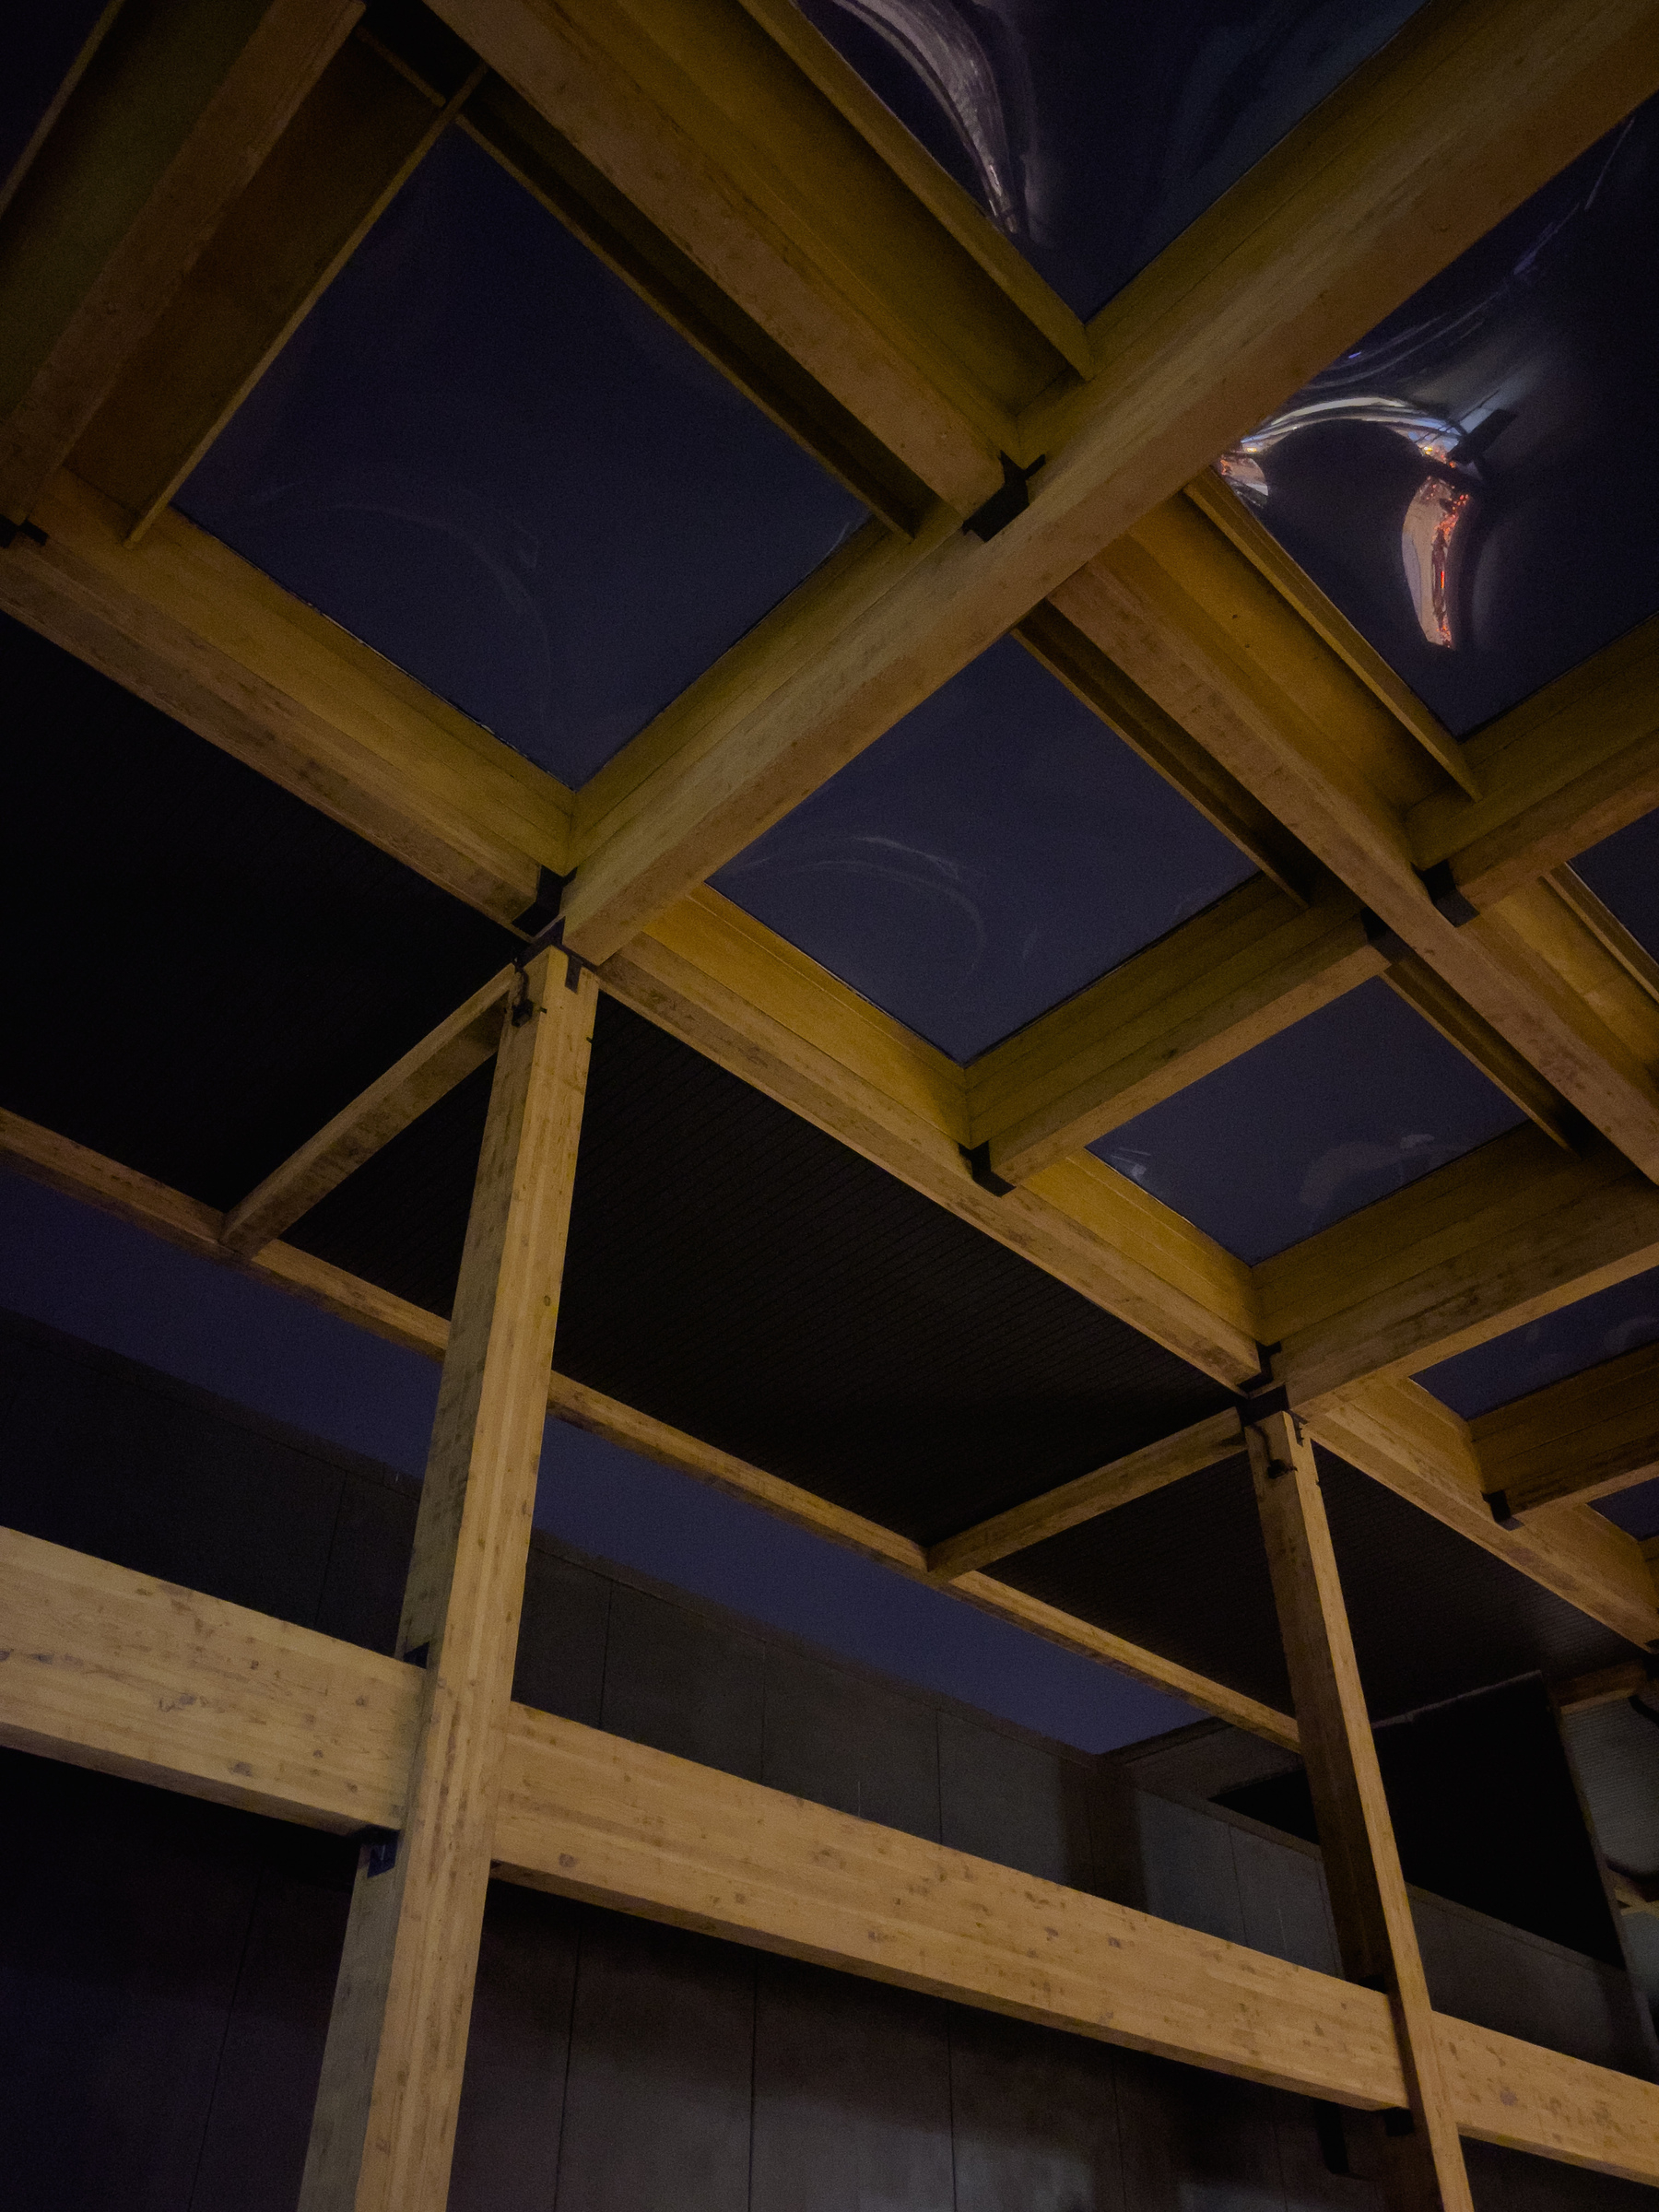 Timber frame skylight and support structure in outdoor atrium, lit by security lights 